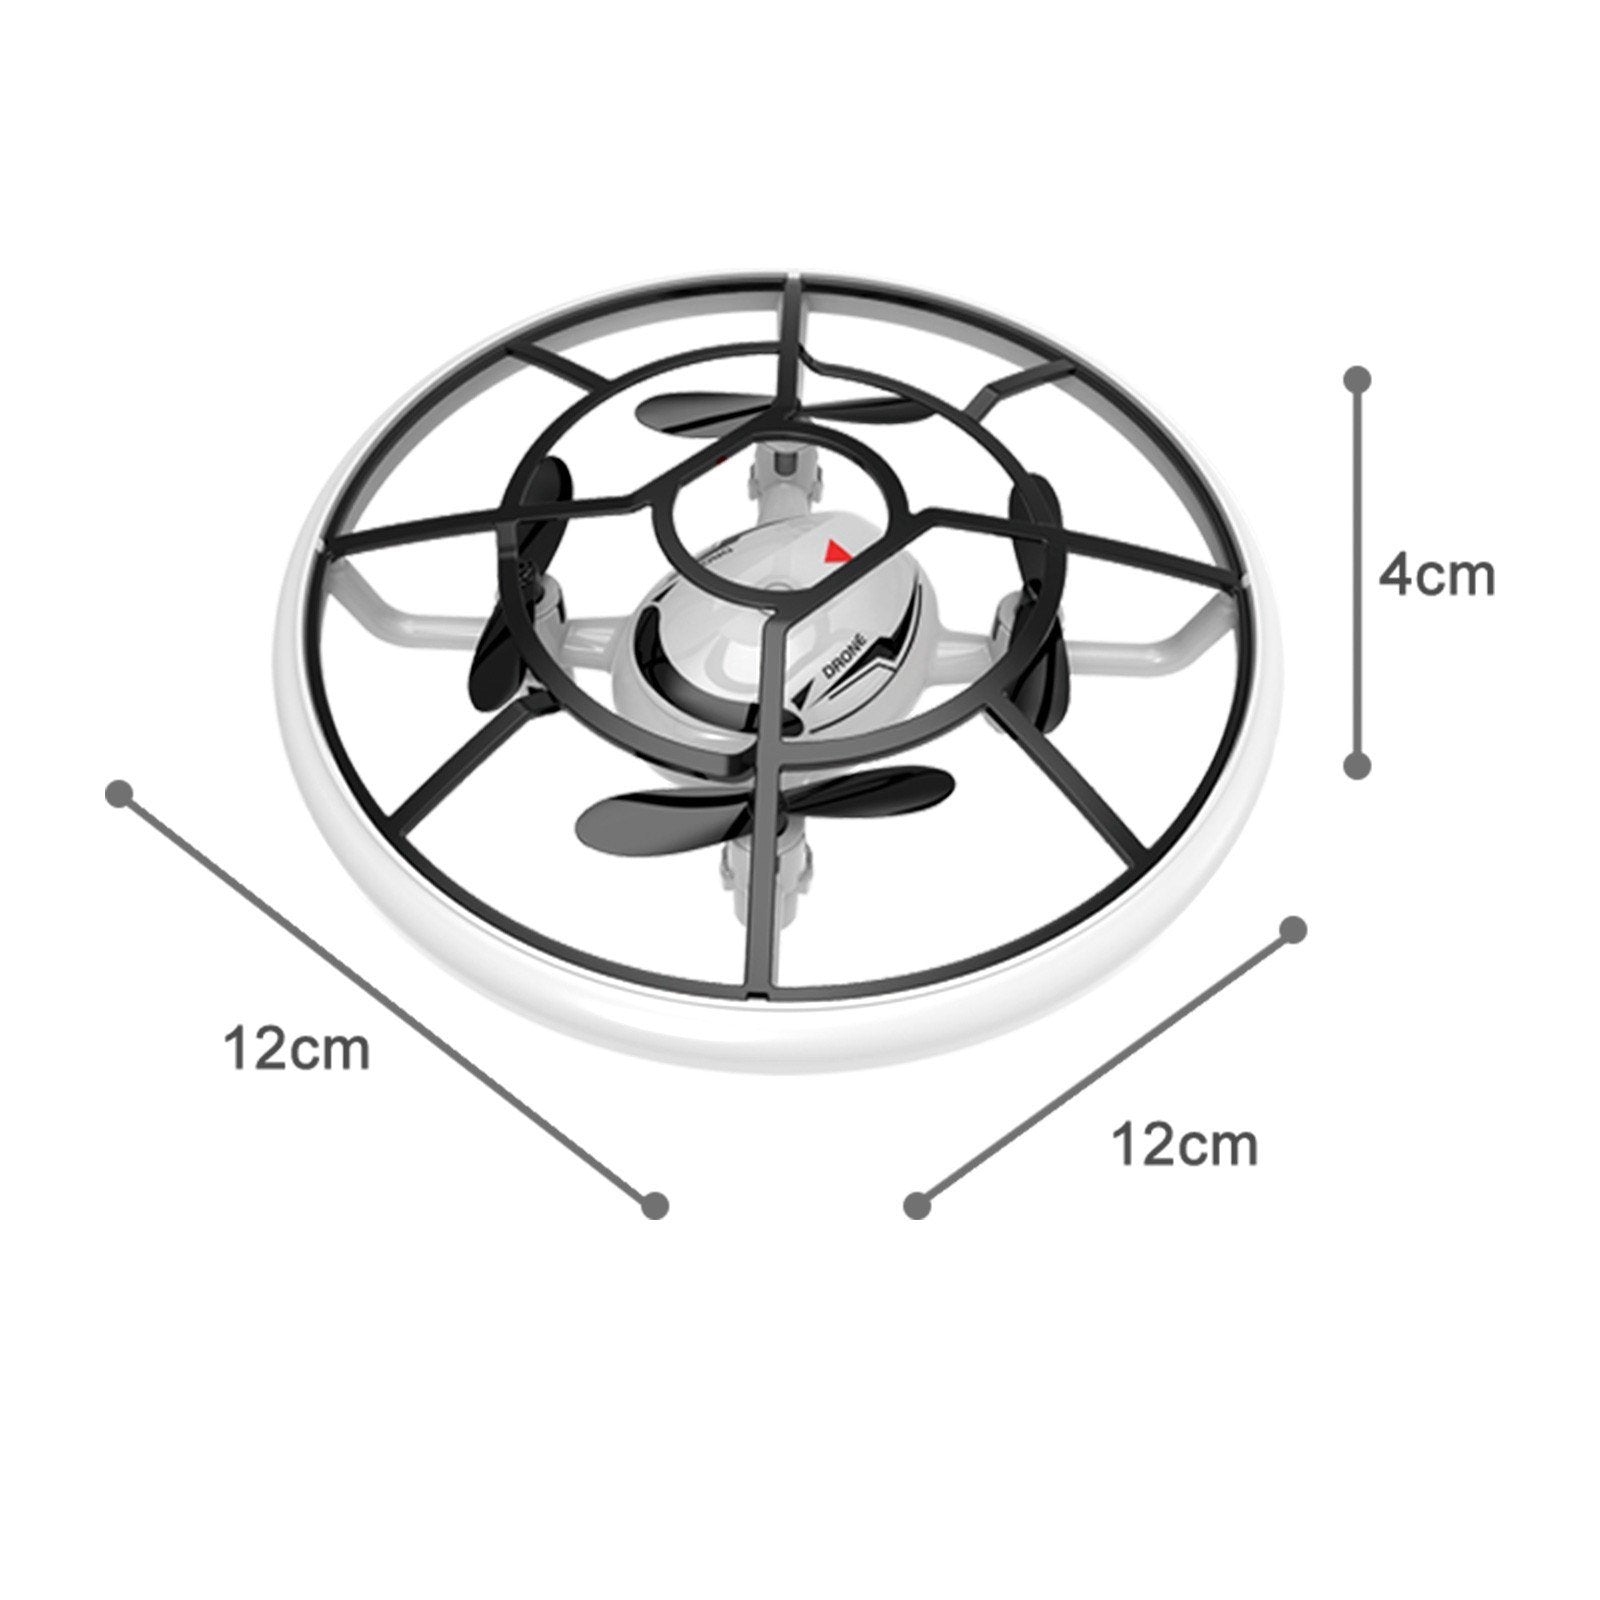 Mini Drones Round Drone Helicopter Altitude Hold Headless Mode 3D Flip LED Lights RC Quadcopter for Training